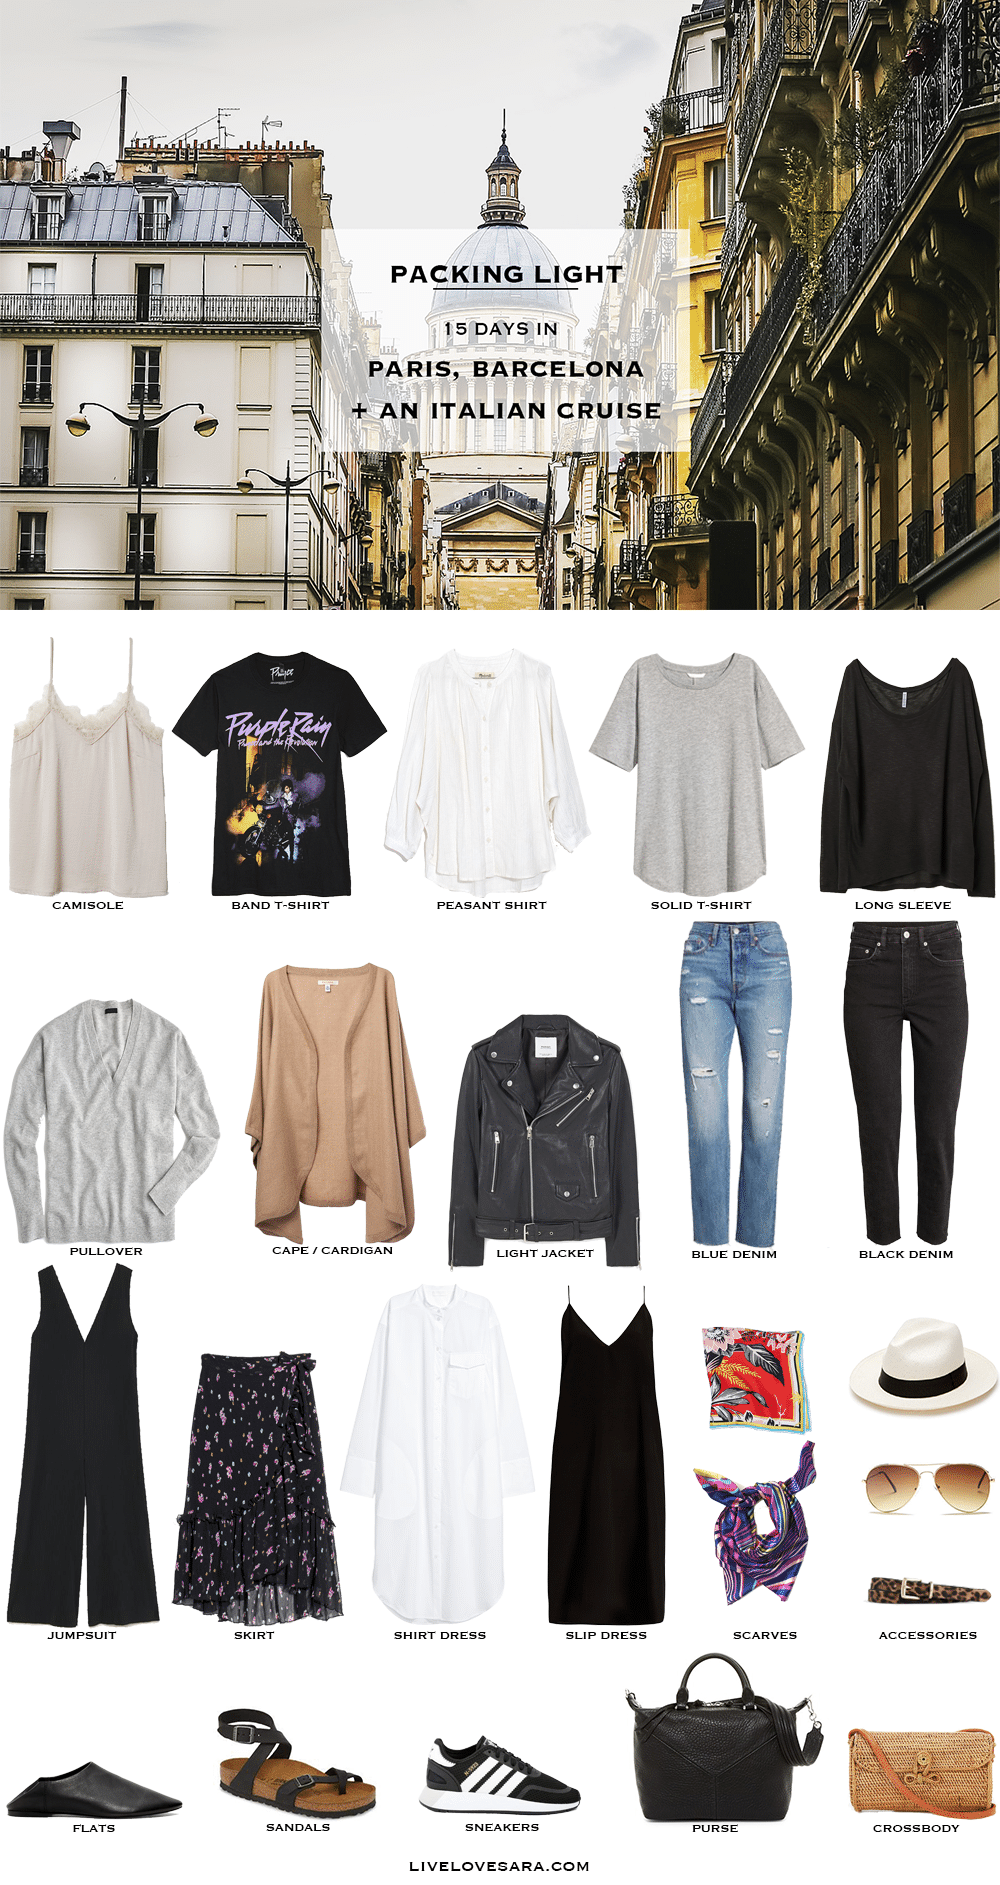 What to pack for Paris packing list | Paris Outfit Ideas | What to Wear in Paris | Barcelona Packing list | Spring Packing List | Barcelona Outfit Ideas | What to Wear in Barcelona | Packing Light | Capsule Wardrobe | travel wardrobe | Fall packing list | travel capsule | livelovesara